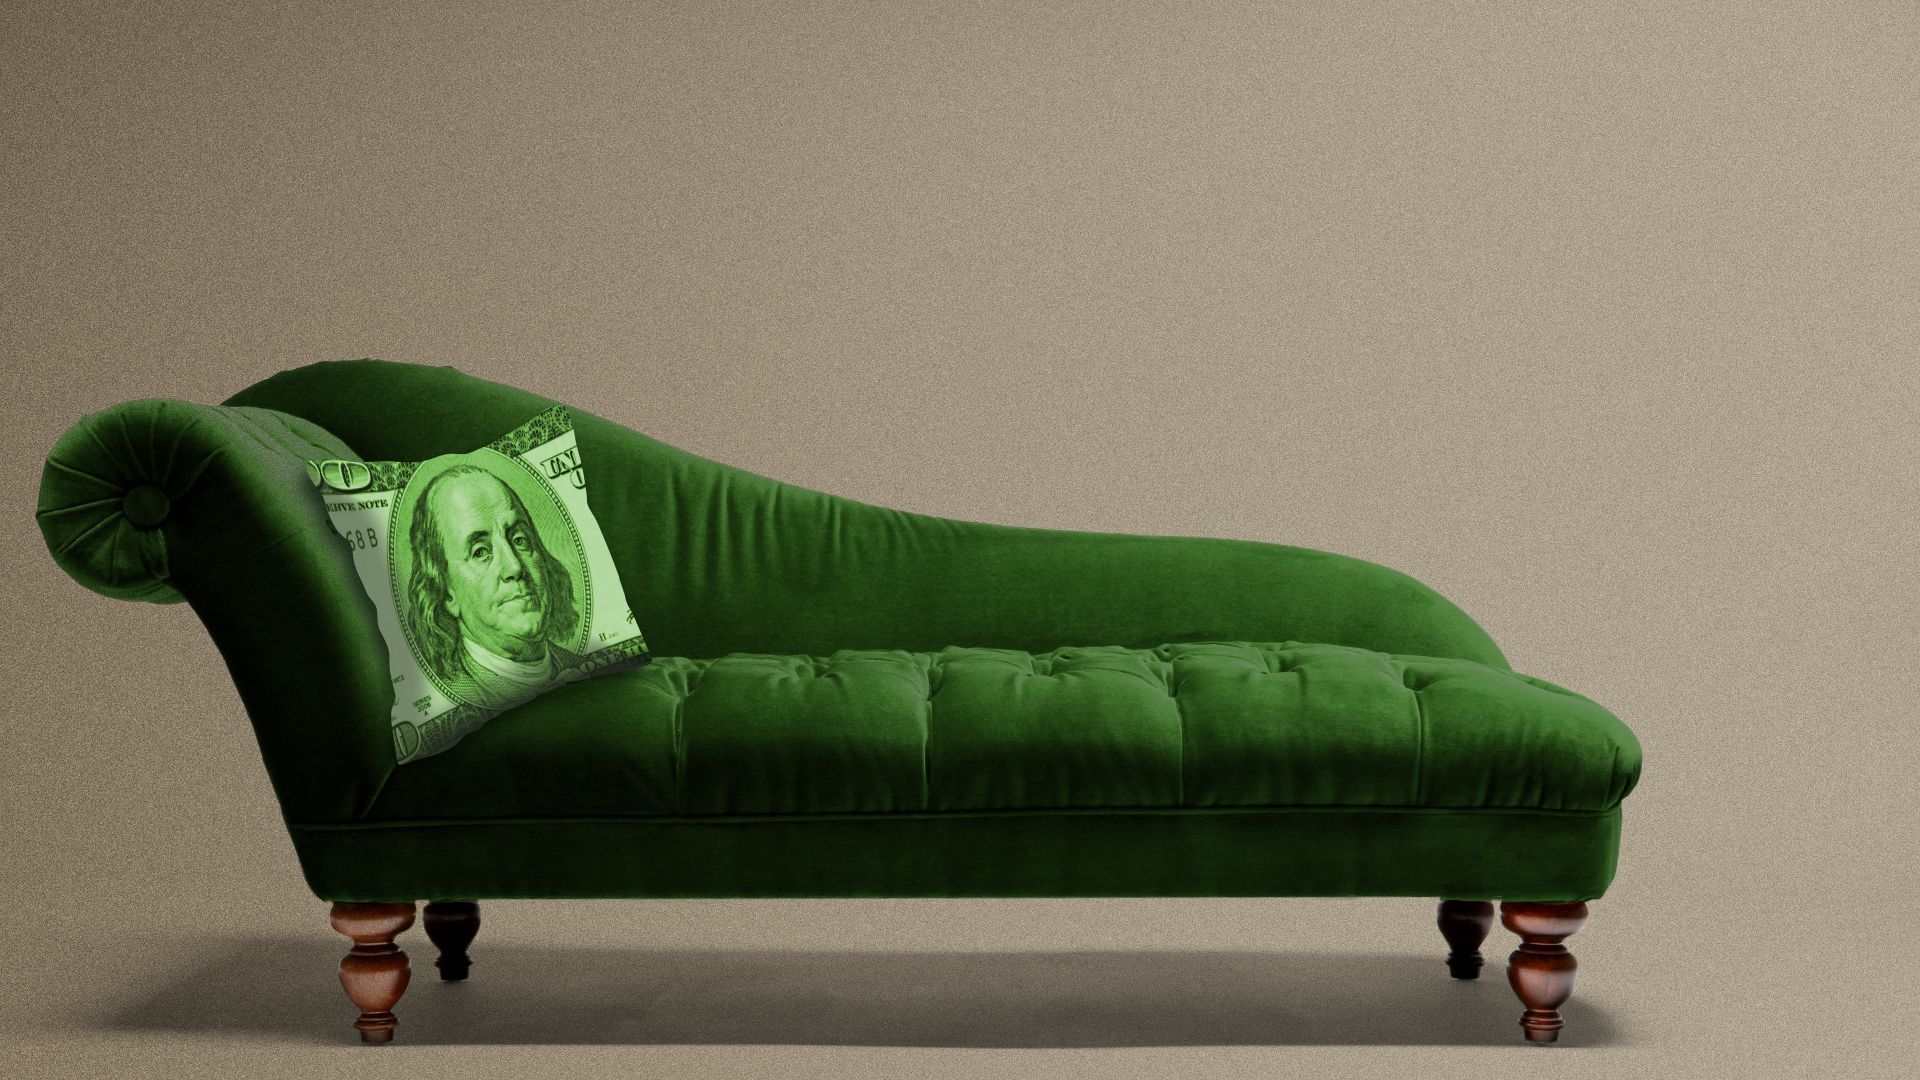 Illustration of a therapy couch with a pillow made of money.